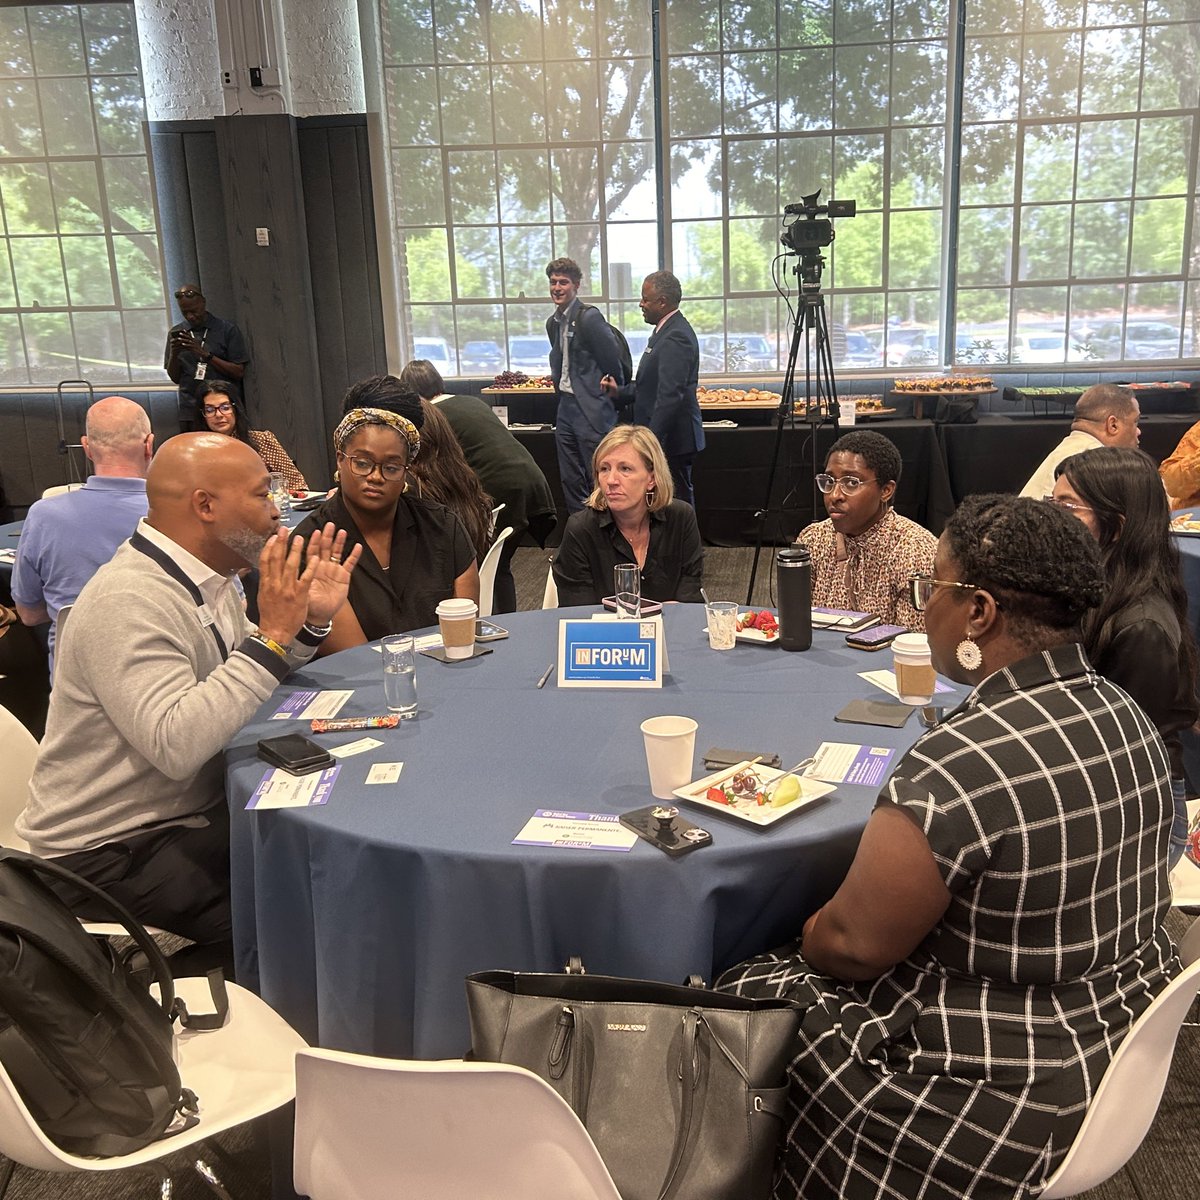 We wrapped the InForum by discussing what we can do as individuals & as a community to improve maternal health in Georgia. Thank you to our panelists & @DrSylviaMorris for their expertise, and thank you to @KPGeorgia & @Publix Super Market Charities for sponsoring today’s event!